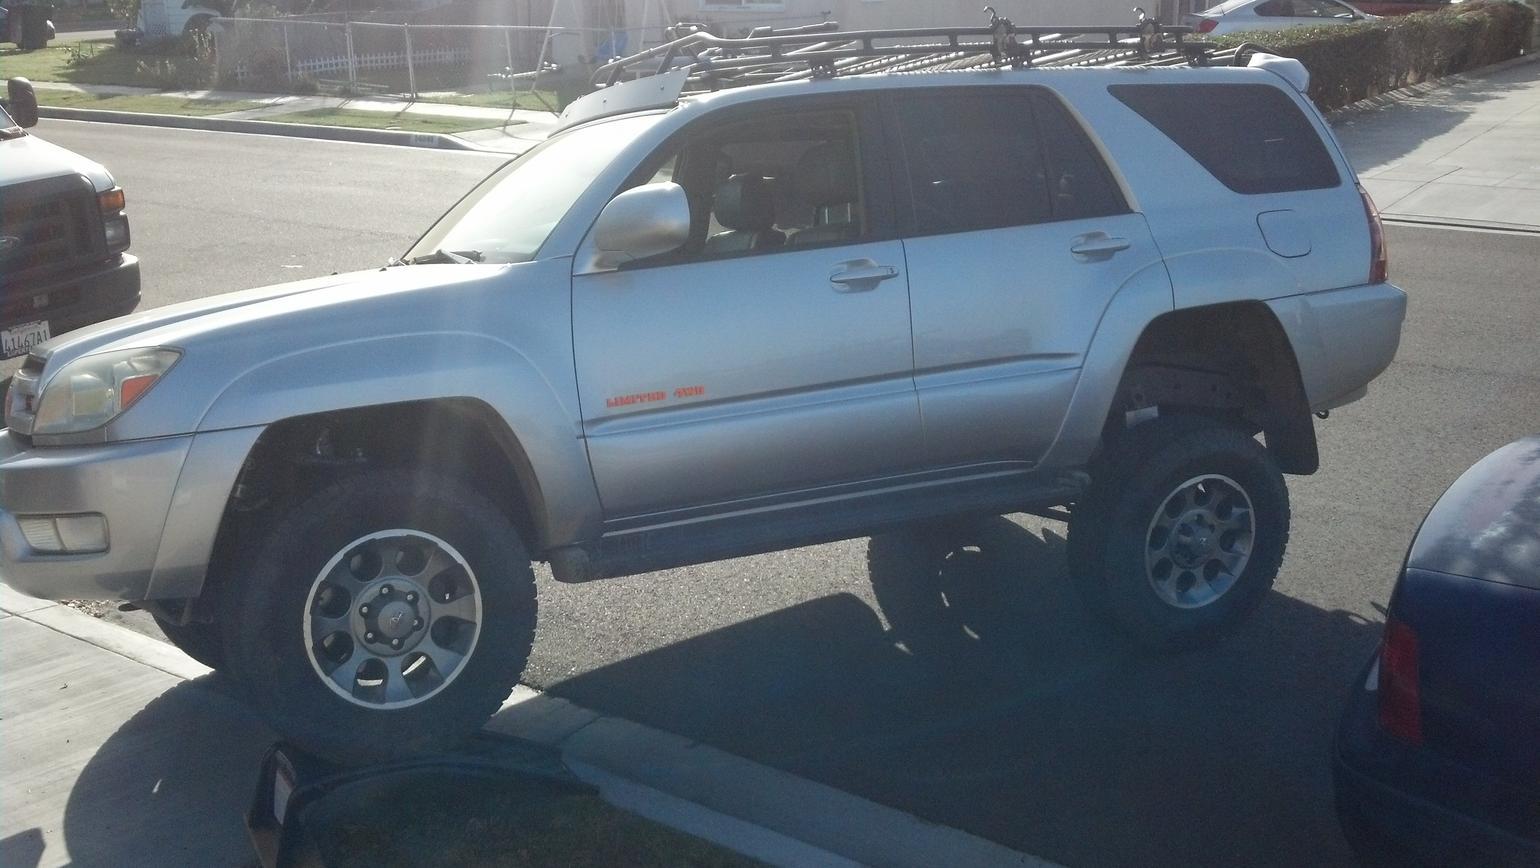 18&quot; limited wheels vs 17&quot; FJ cruiser wheels, opinions and pictures welcome!-img_20131117_144212_269-jpg